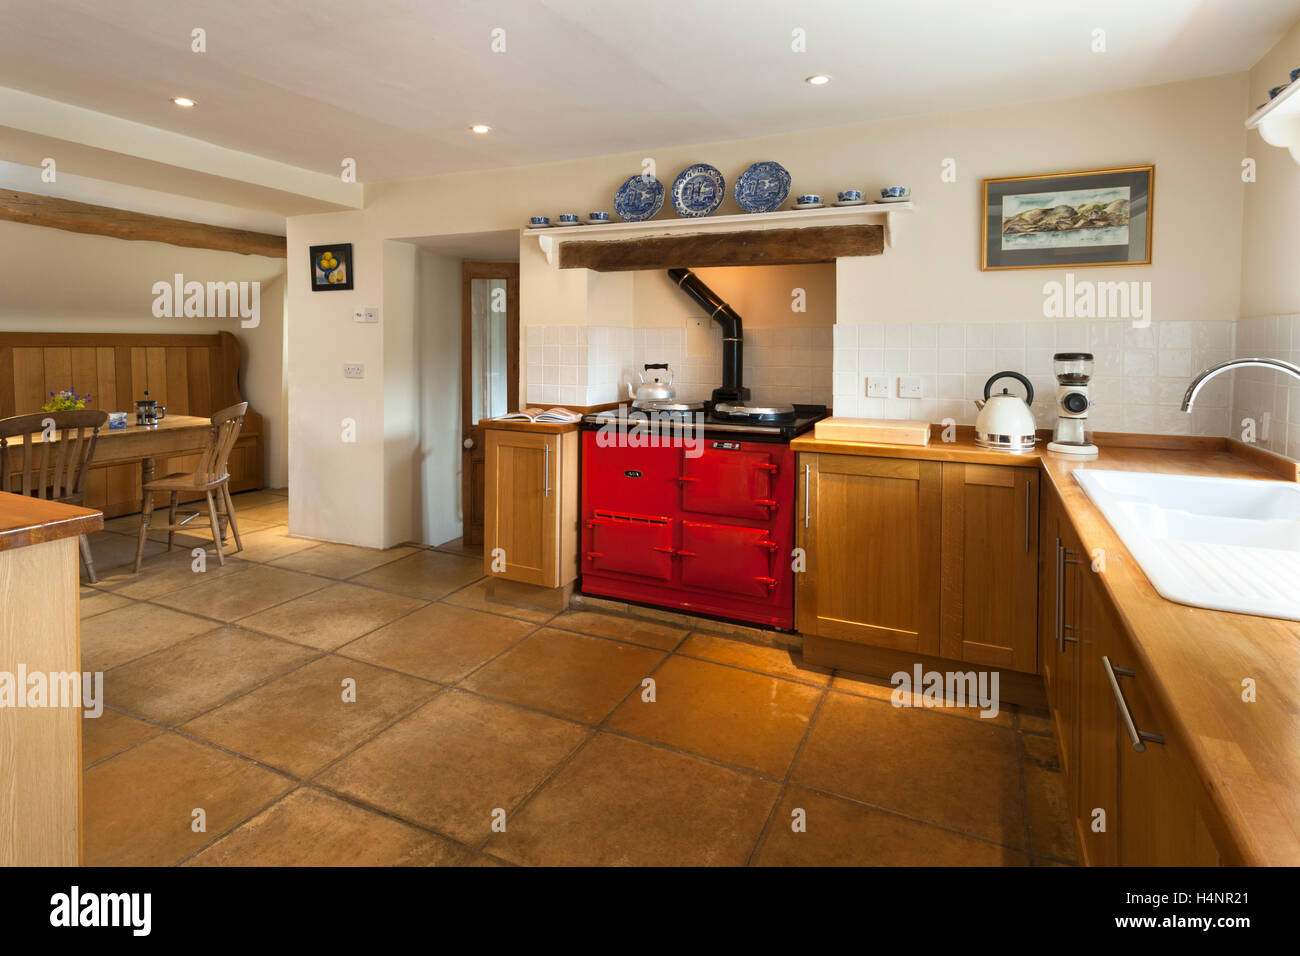 A simple wooden finished fitted kitchen with a vibrant red Aga range cooker focal point. Stock Photo